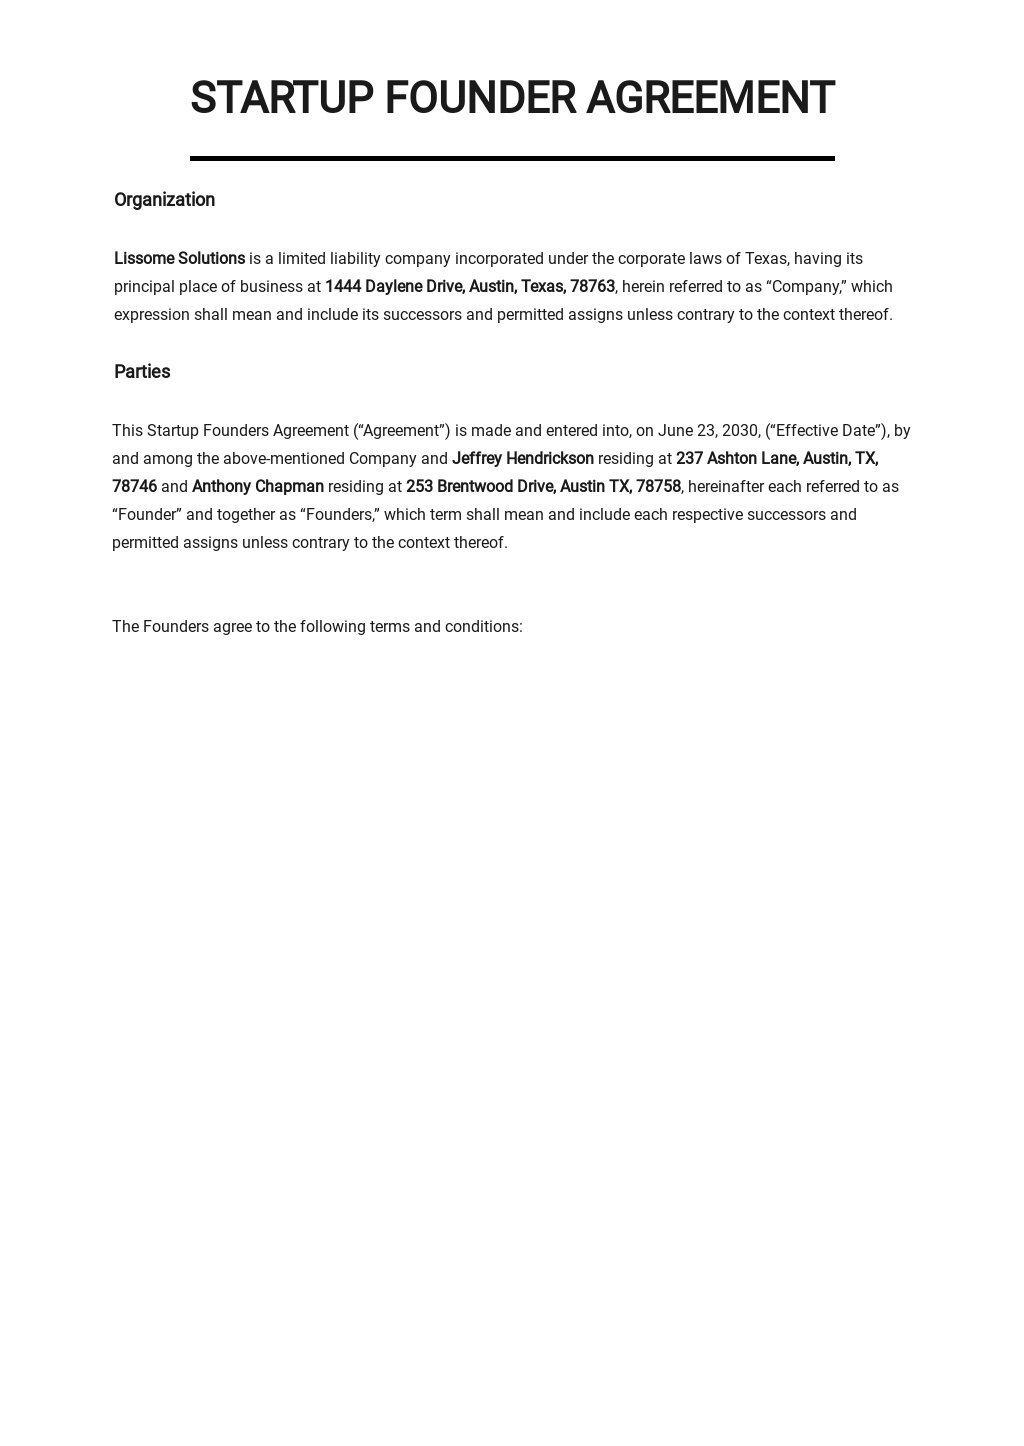 Startup Founders Agreement Template - Google Docs, Word, PDF For startup founders agreement template